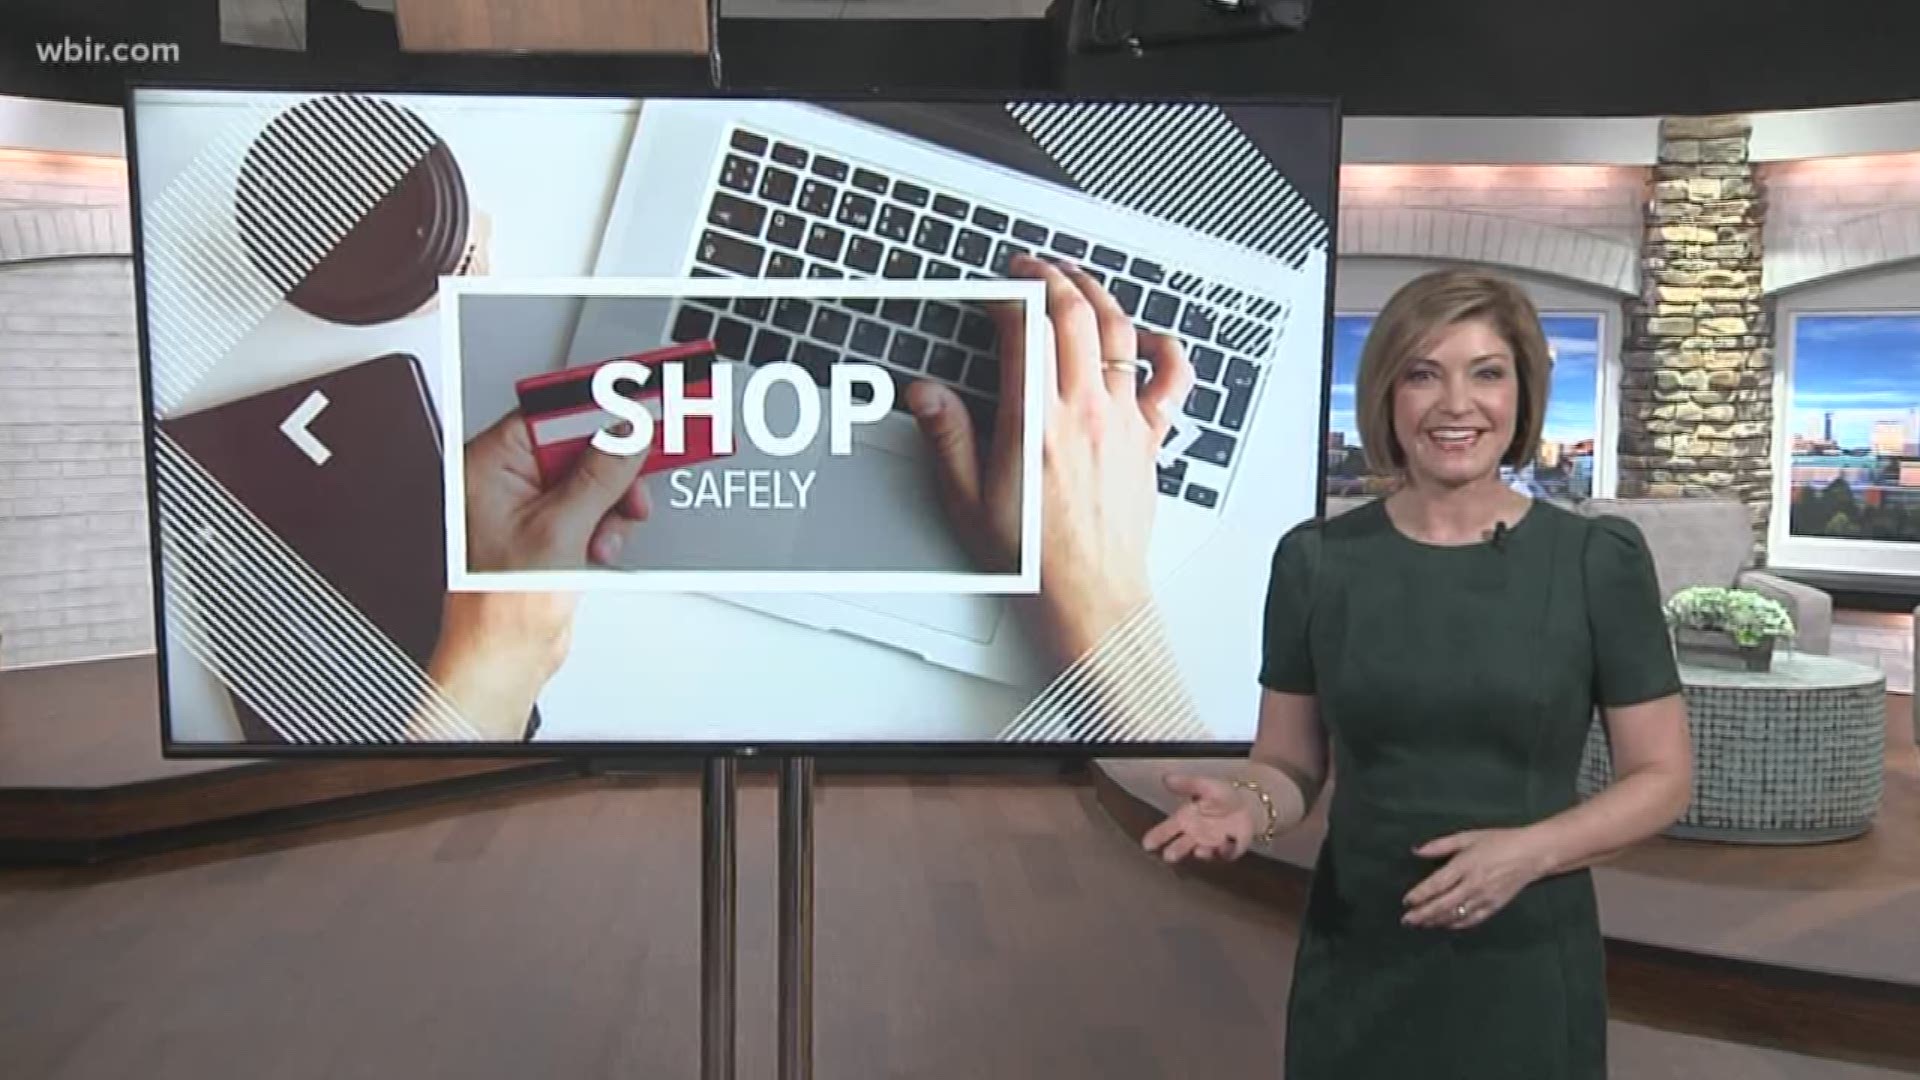 Experts explain how to make sure your holiday shopping is safe: using reputable apps, avoiding public wifi and more.